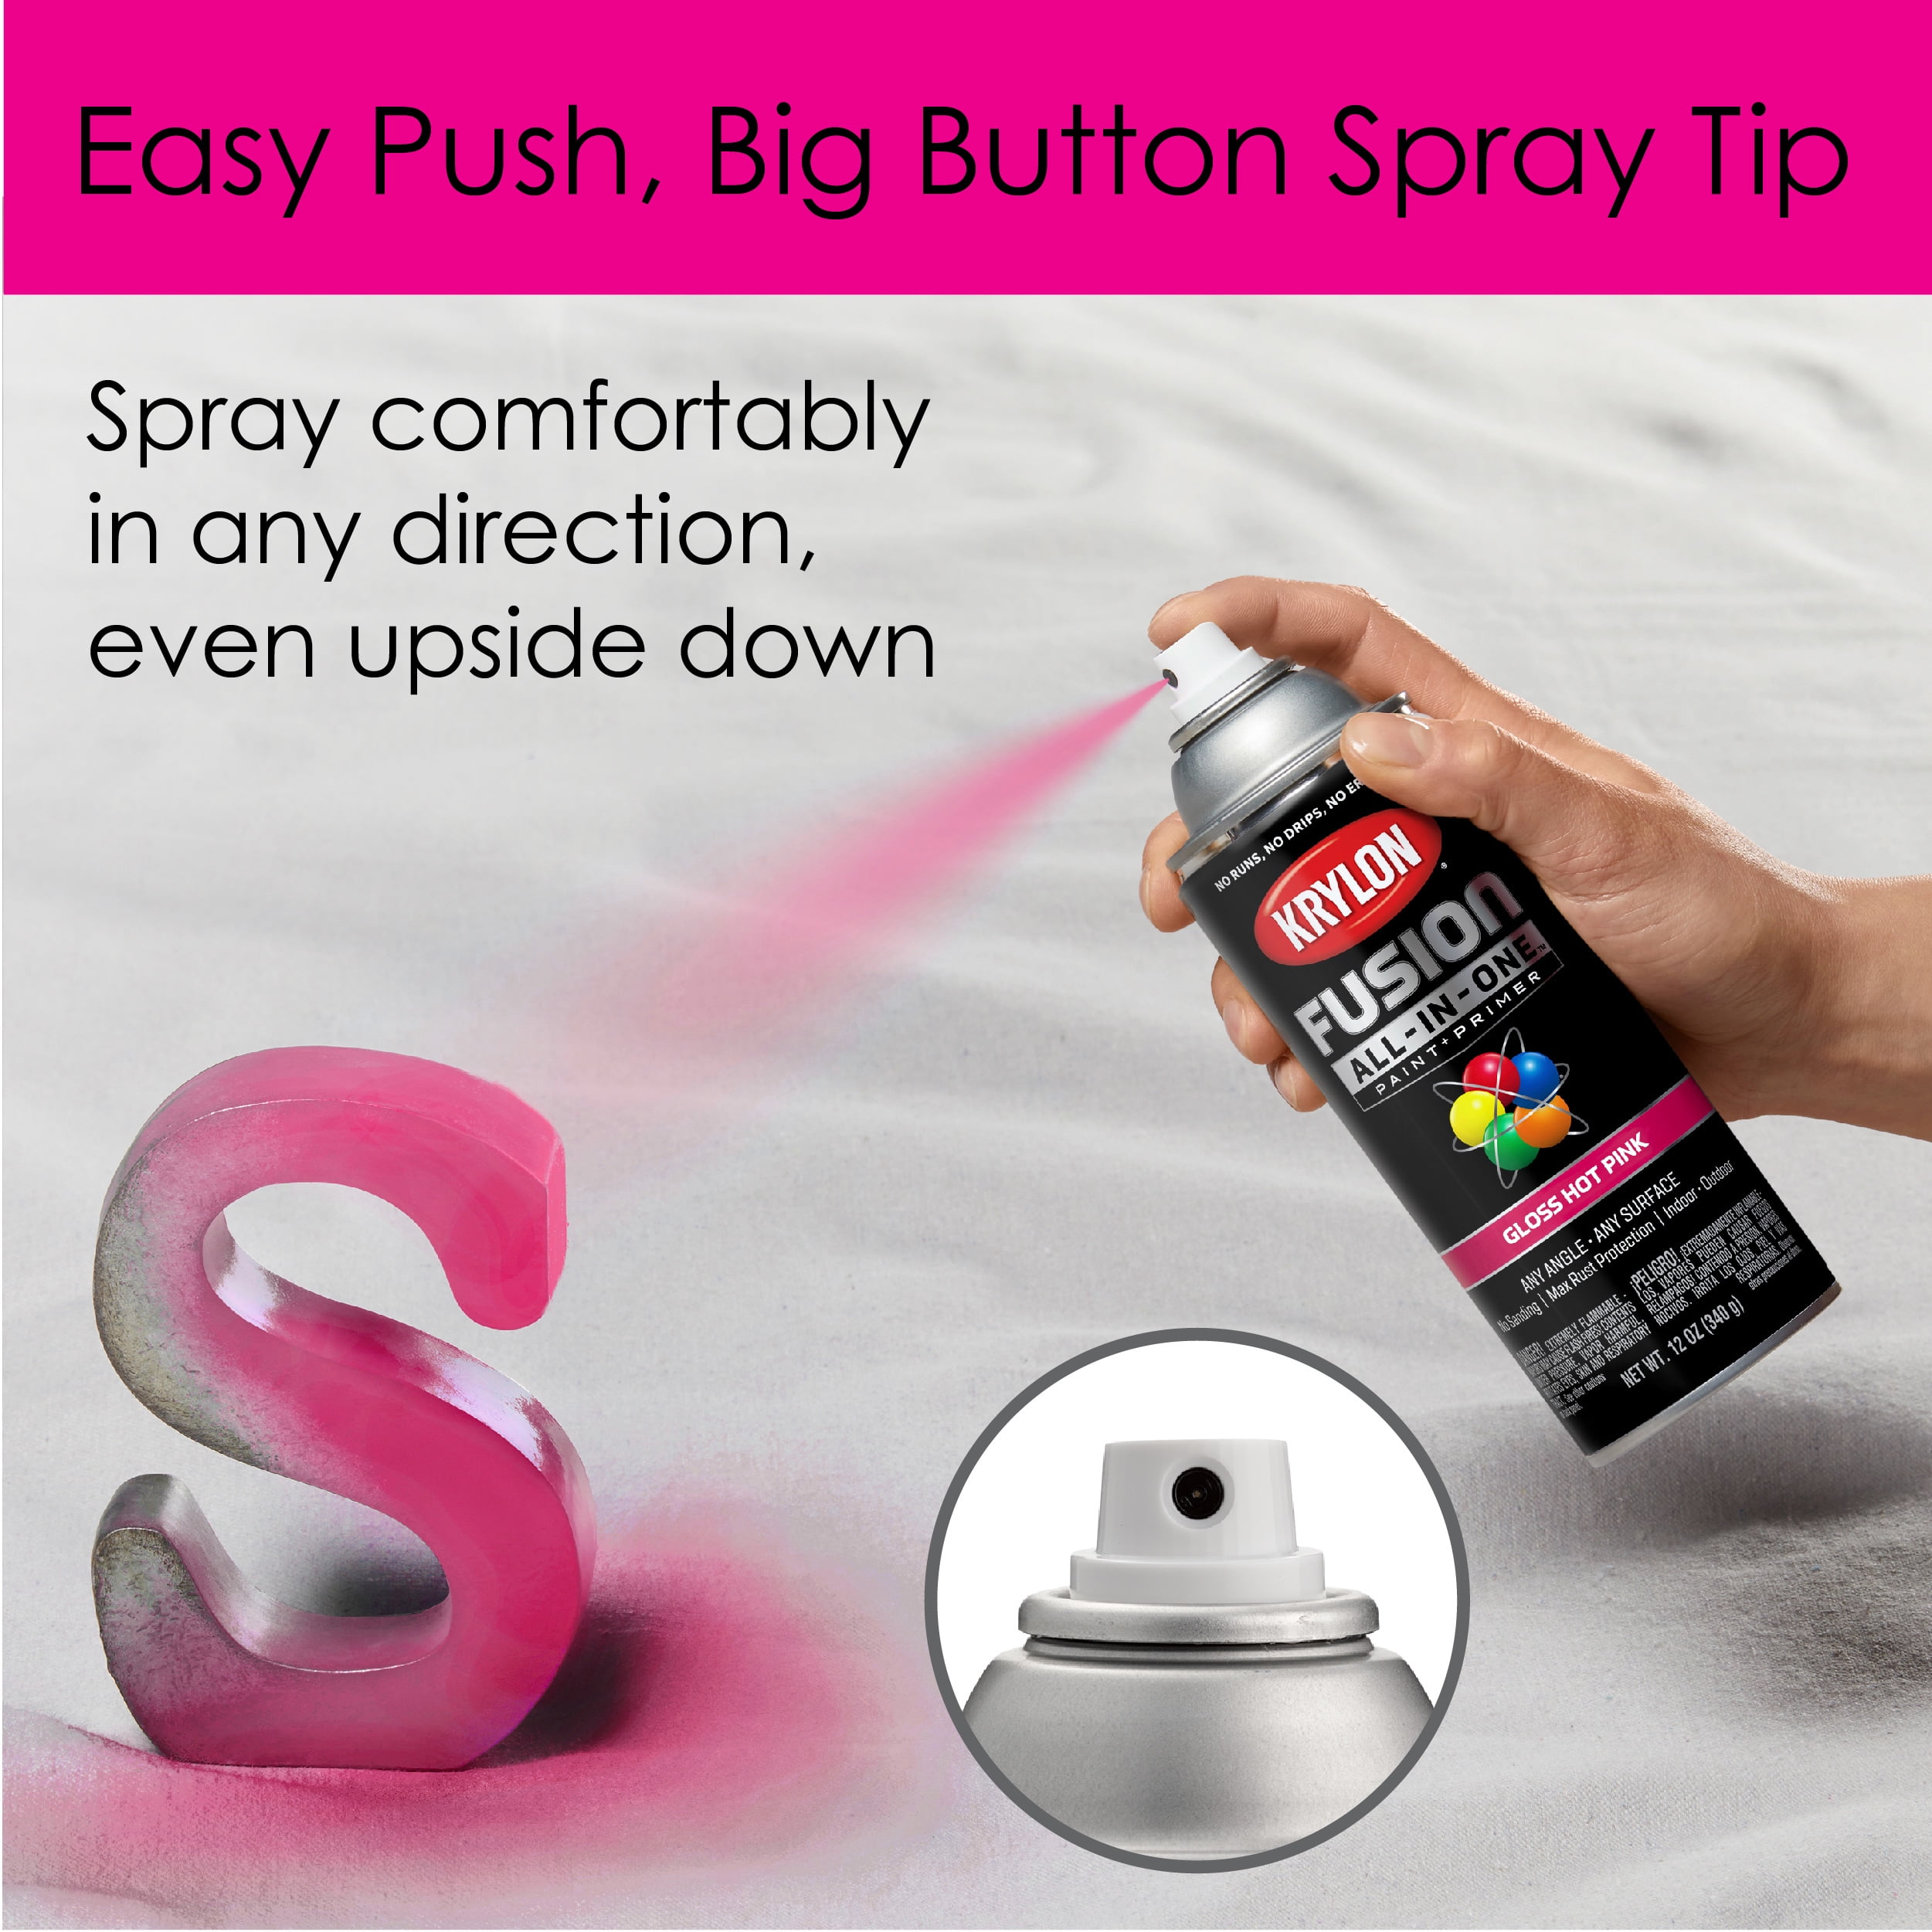 Krylon K02708007 Fusion All-In-One Spray Paint for Indoor/Outdoor